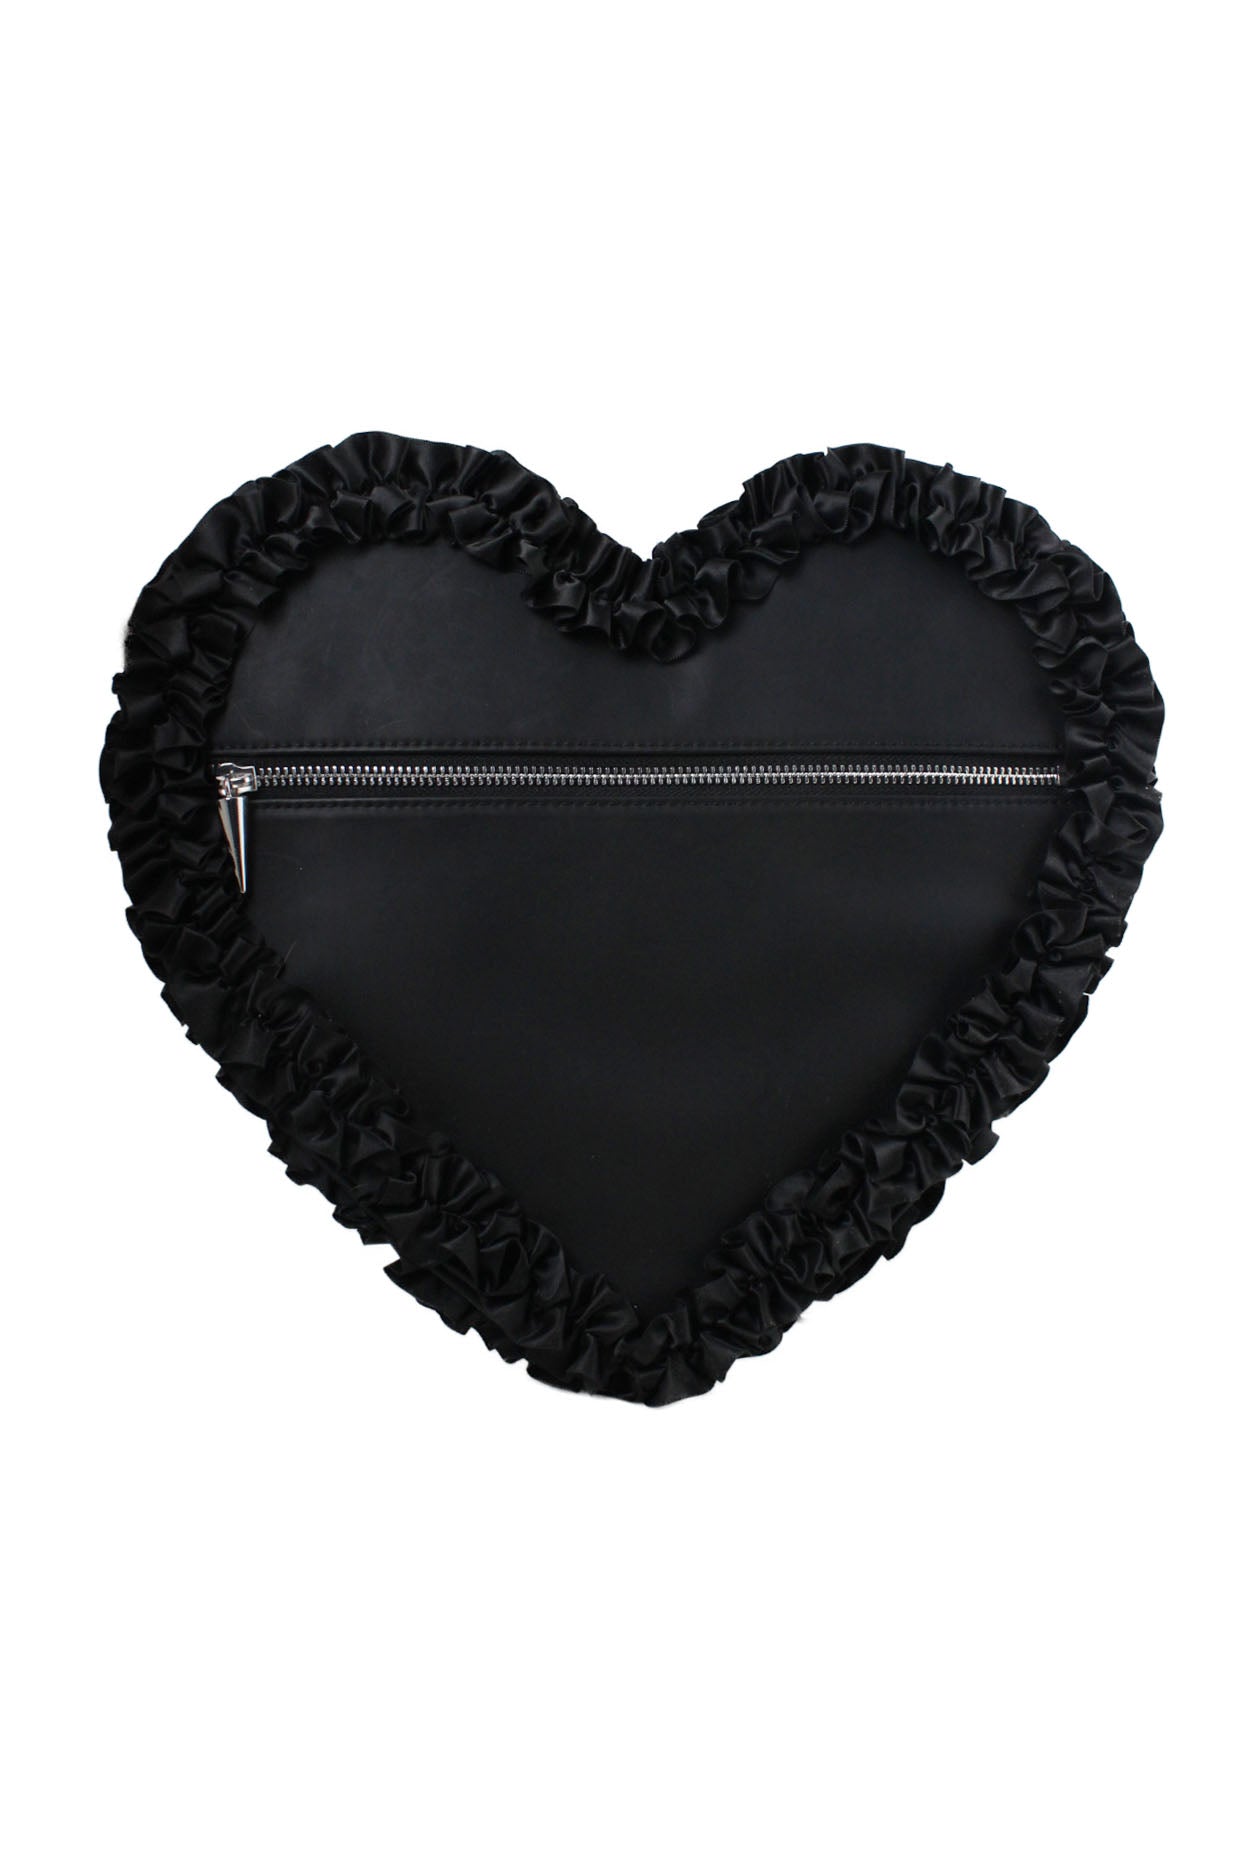 front of unlabeled black heart hand bag. features heart shape design, ruffled embellish at edges, and zip pocket with spike pendant. 